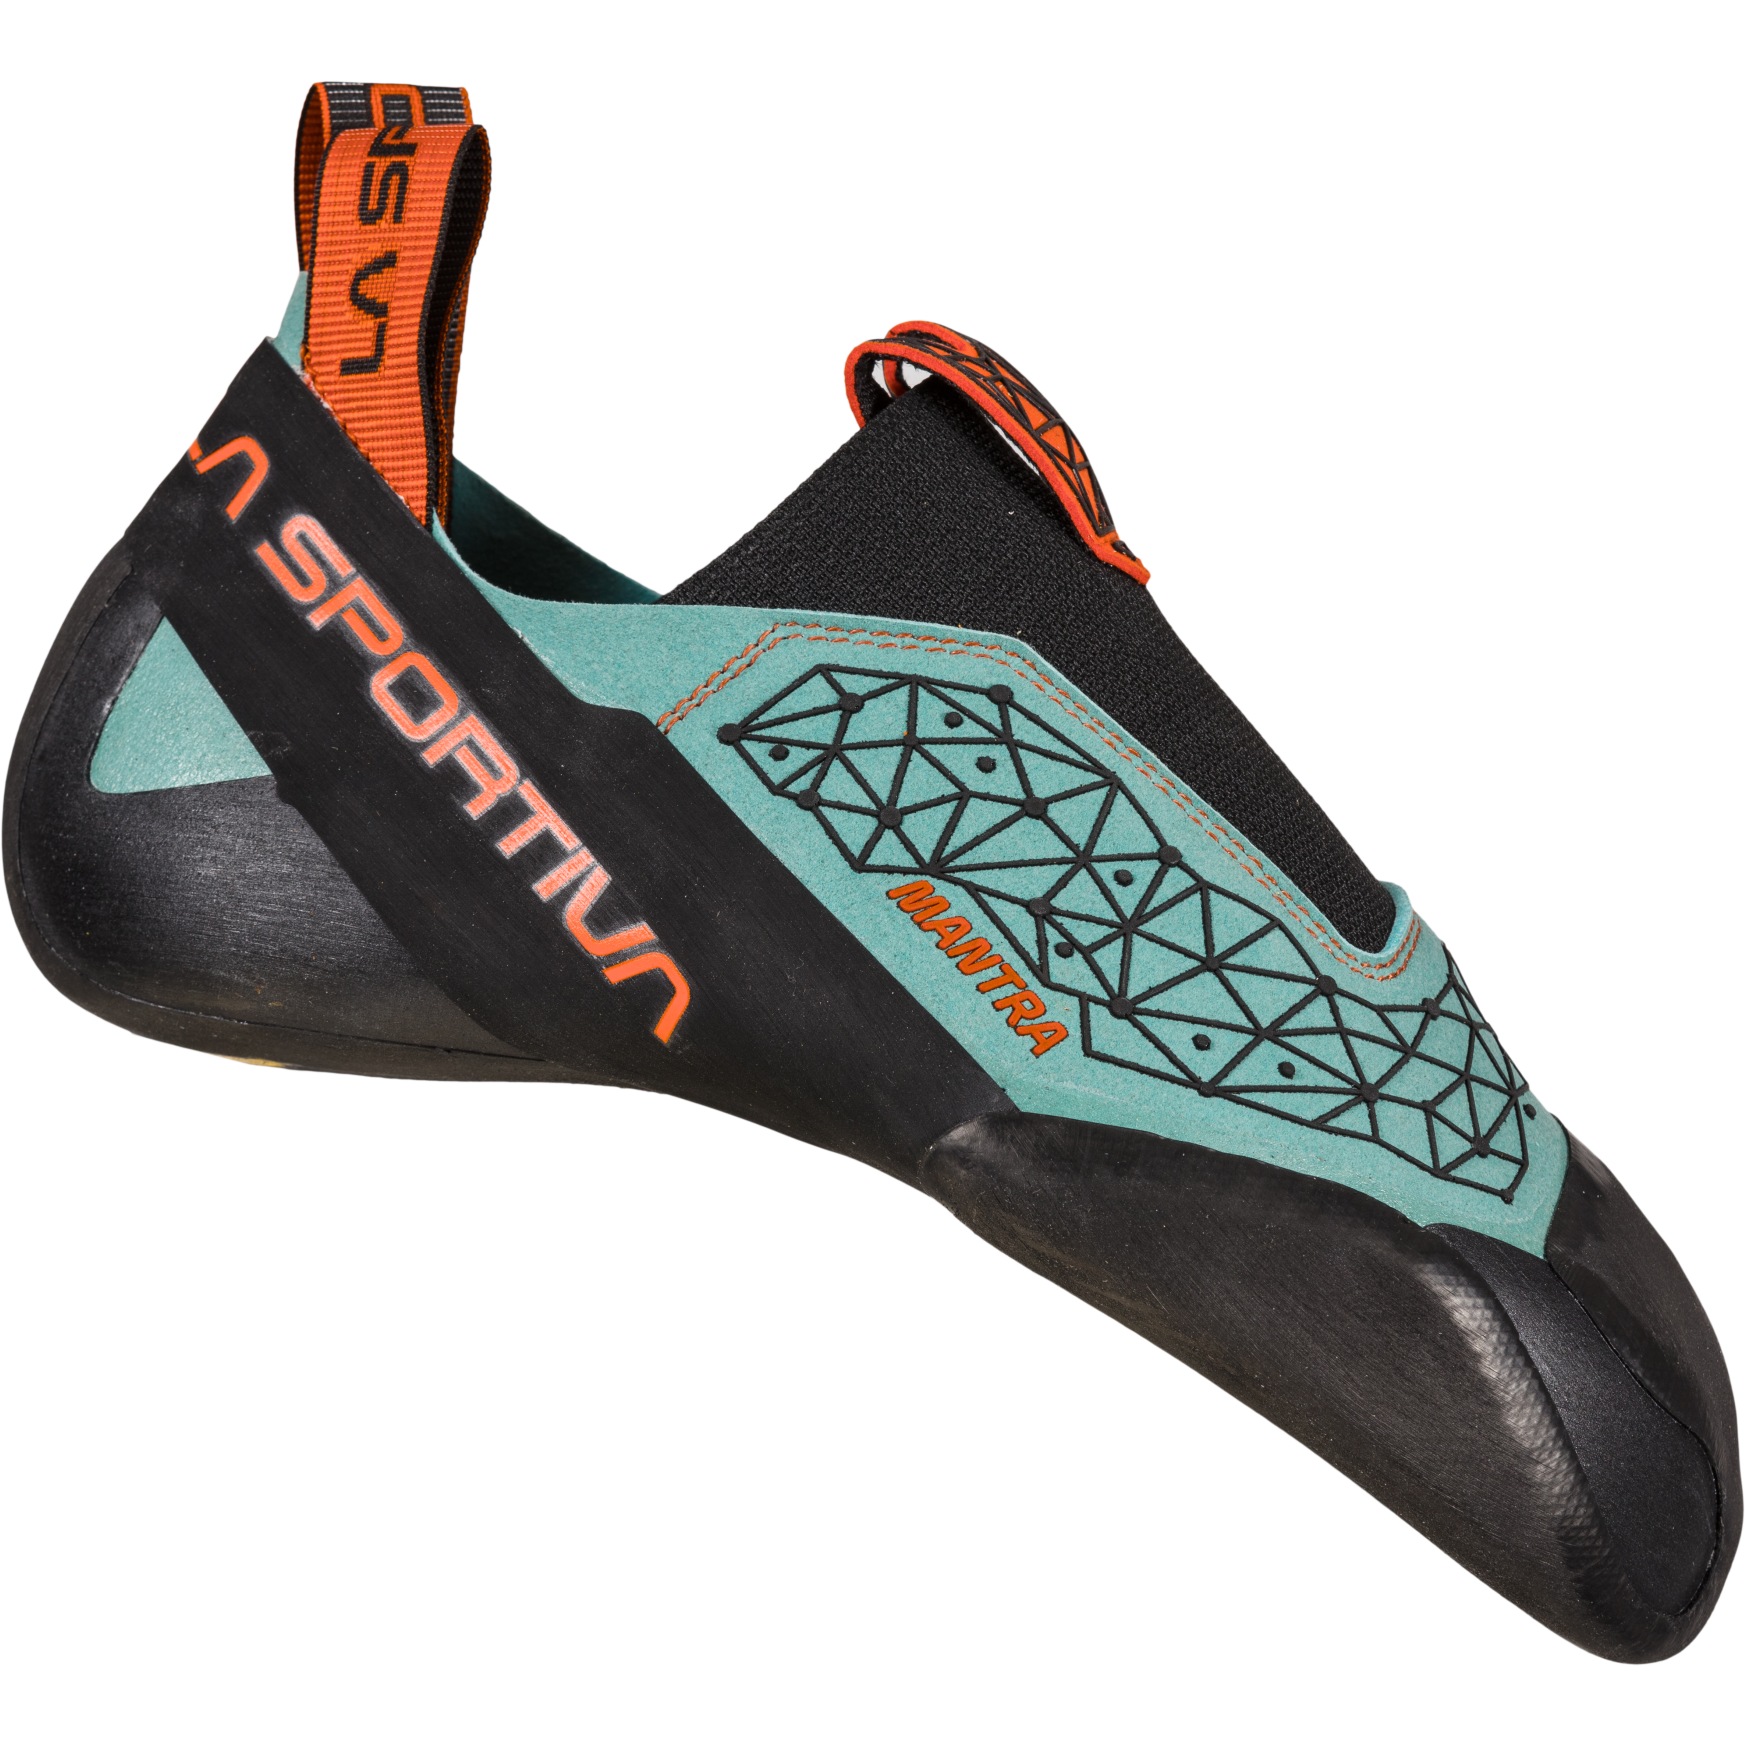 Picture of La Sportiva Mantra Climbing Shoes - Arctic/Flame